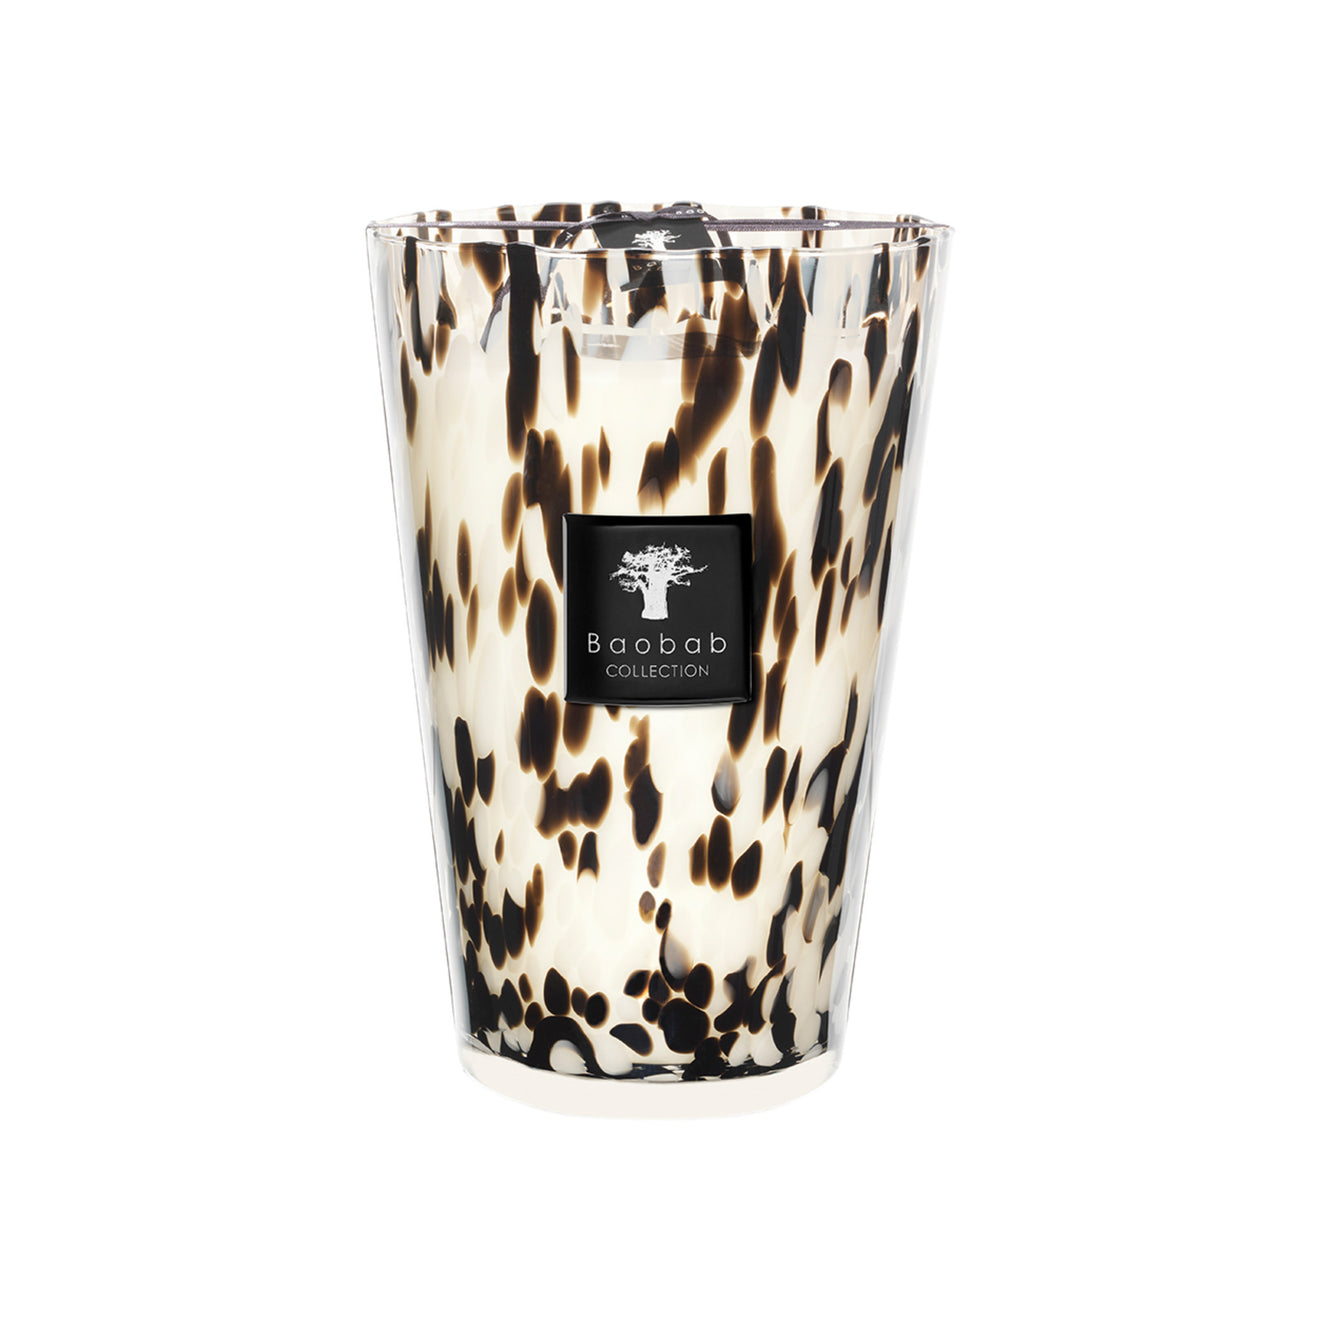 Baobab Collection Pearls Black Candle Size variant: 21.59 lb (Max 35) main image.